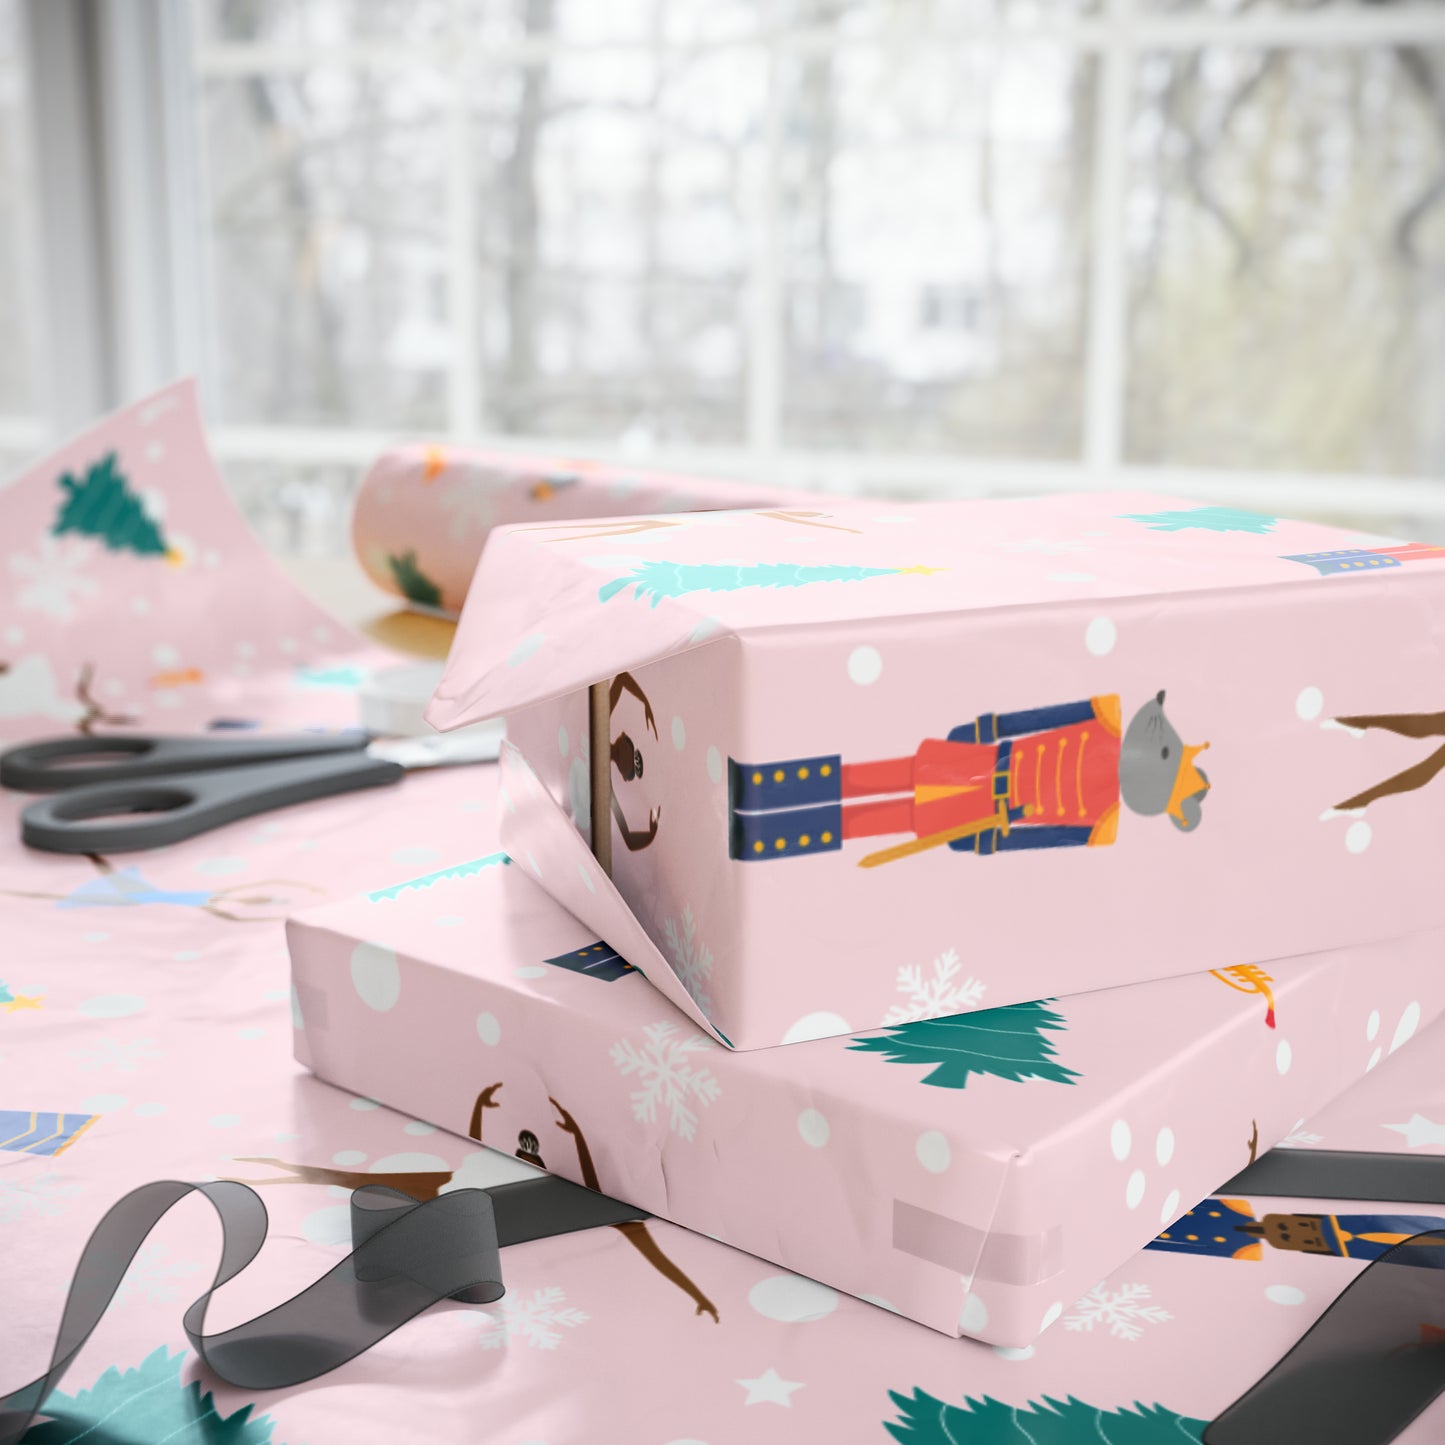 Chocolate Nutcracker Wrapping Paper